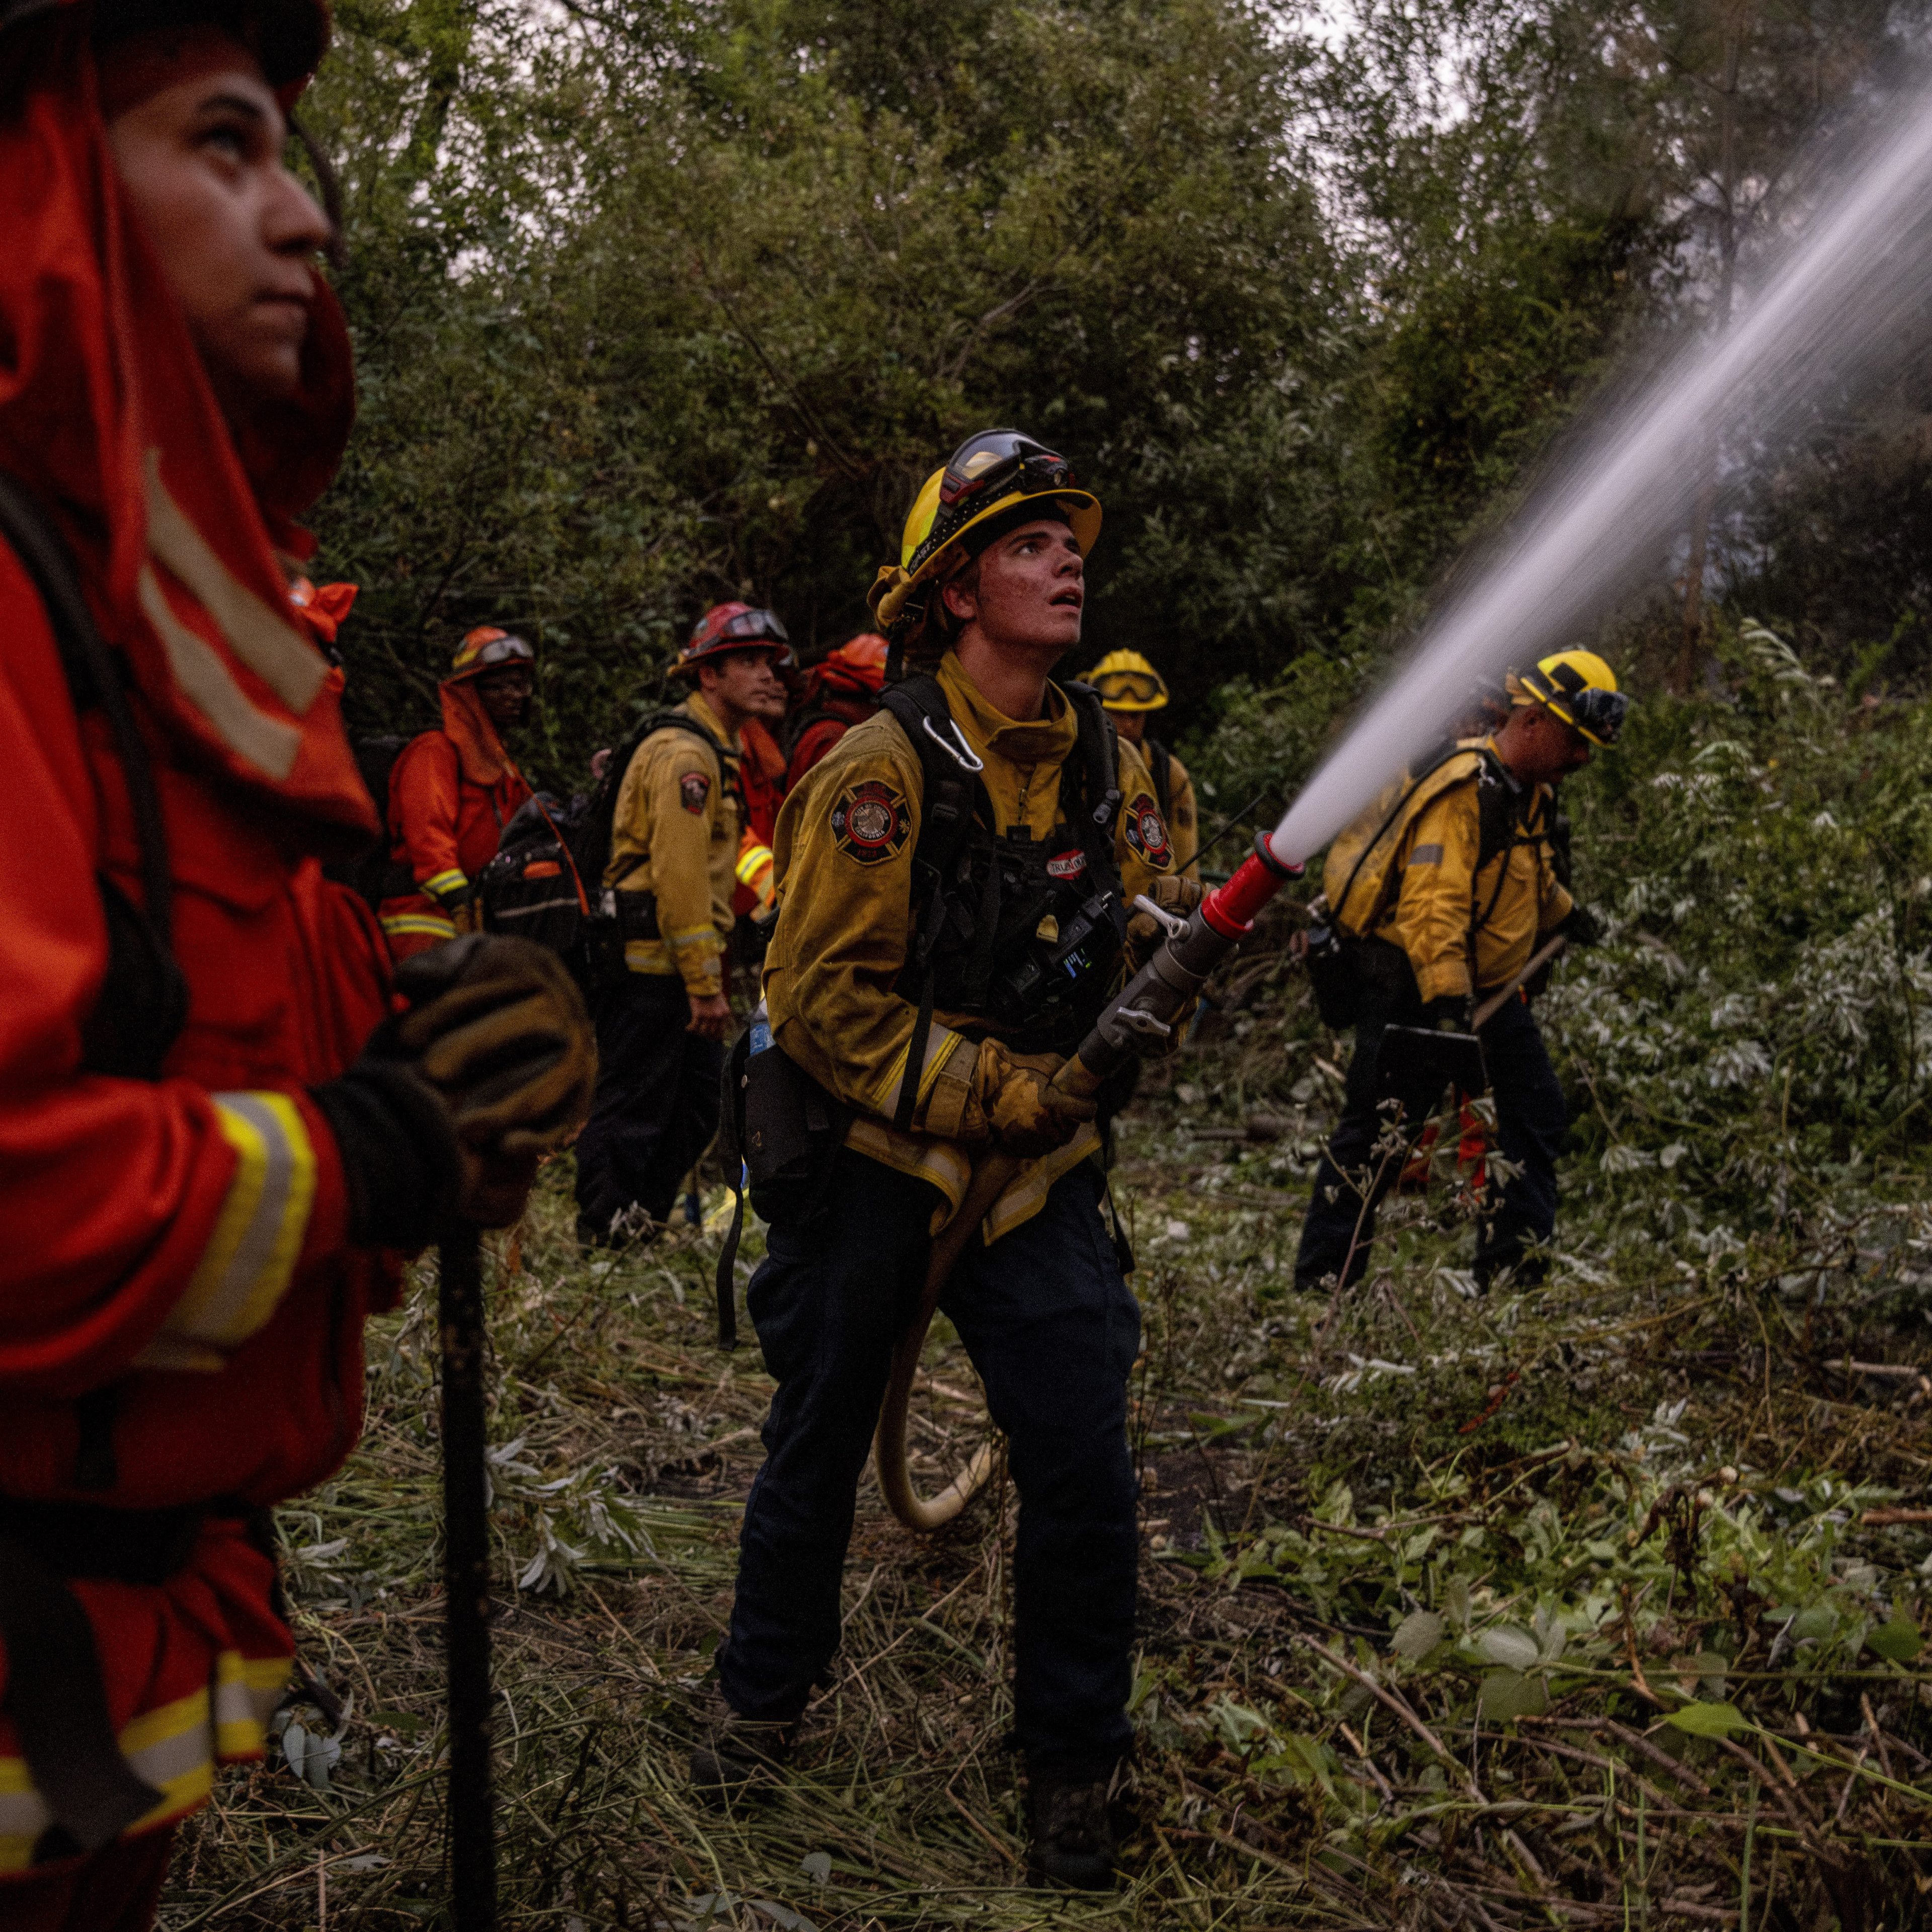 Firefighters in yellow and orange uniforms are in a forest area, with one firefighter aiming a hose spraying water, surrounded by greenery and focused expressions.